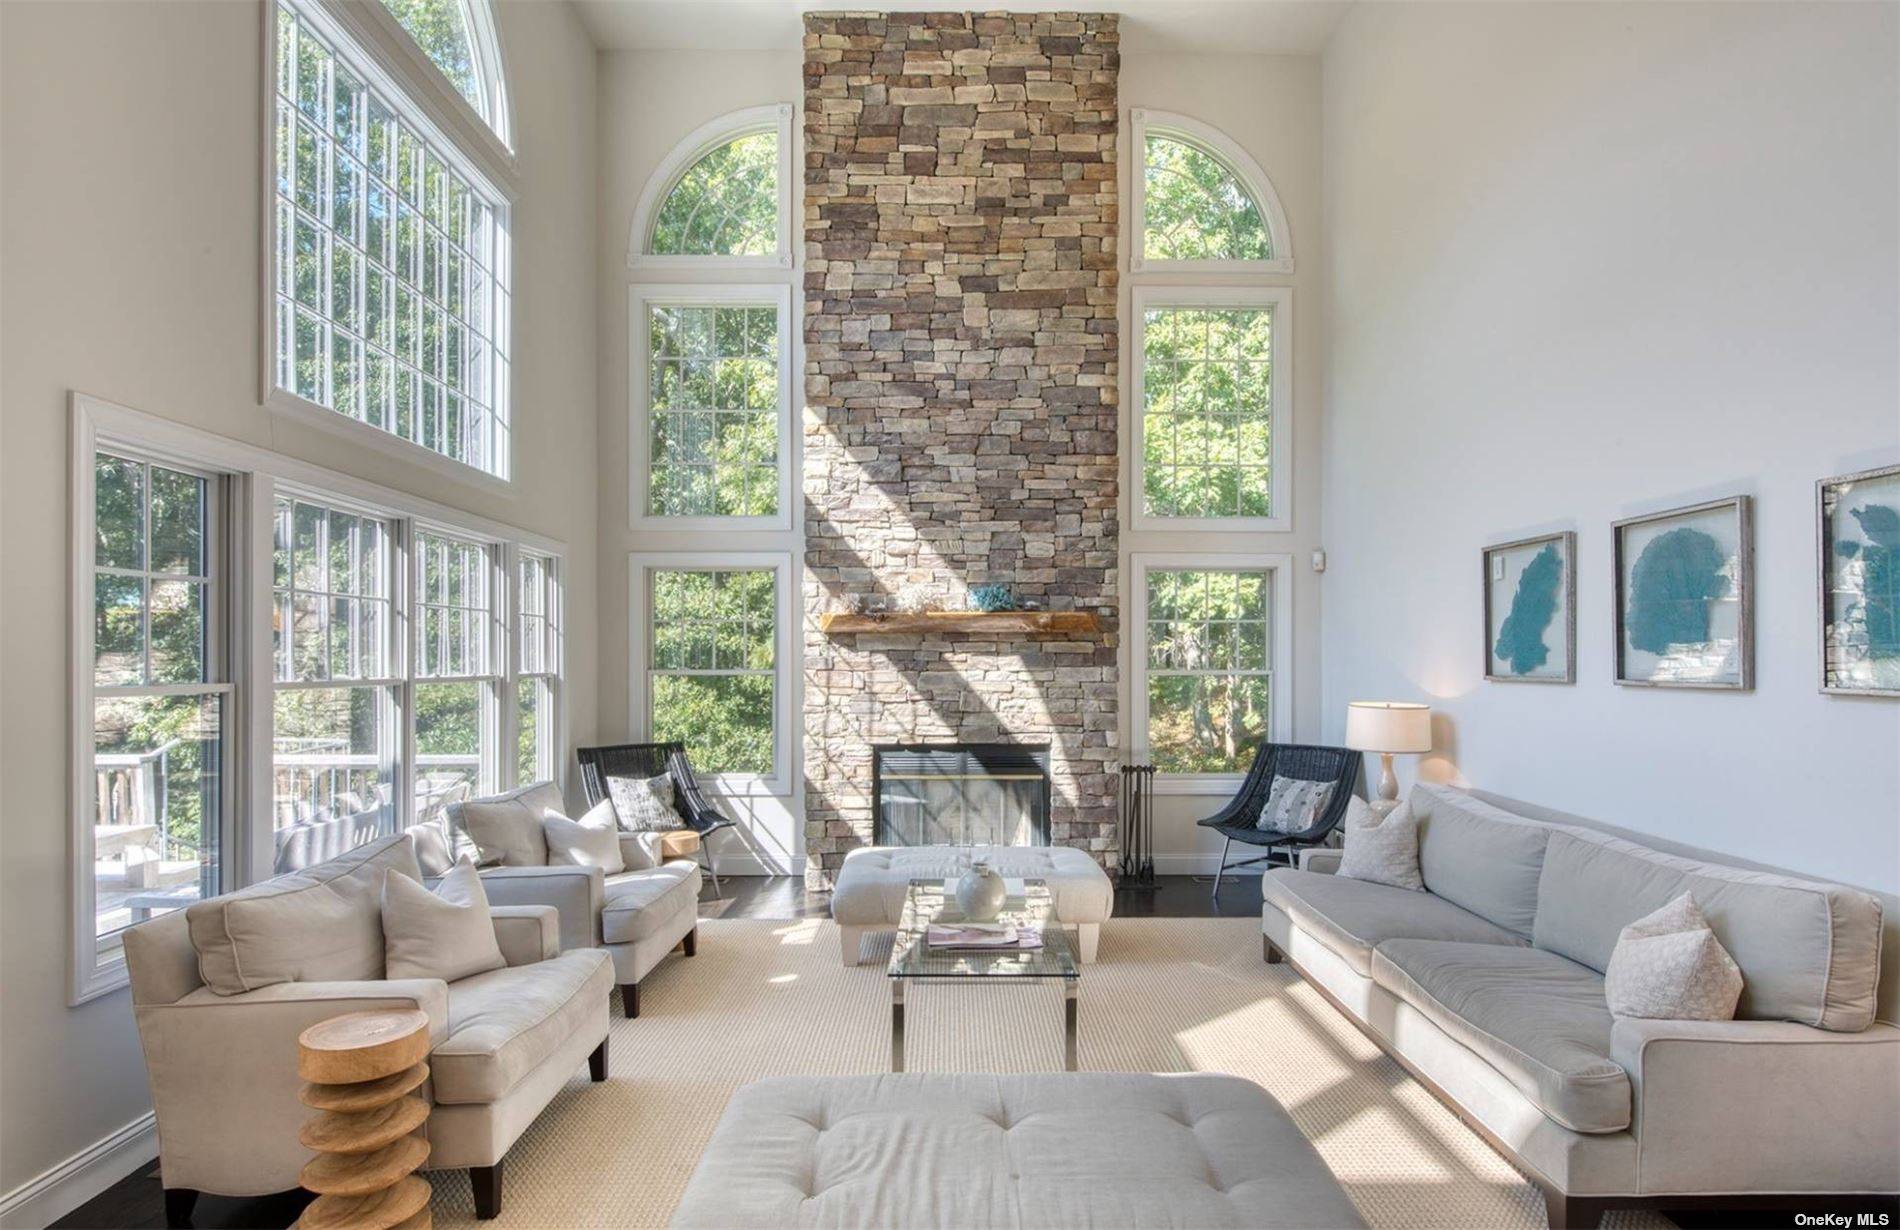 Secluded and amenity filled, this Southampton property features an expansive 6000 sf of immaculate interior living space across 3 stories and multiple indoor and outdoor entertaining areas.